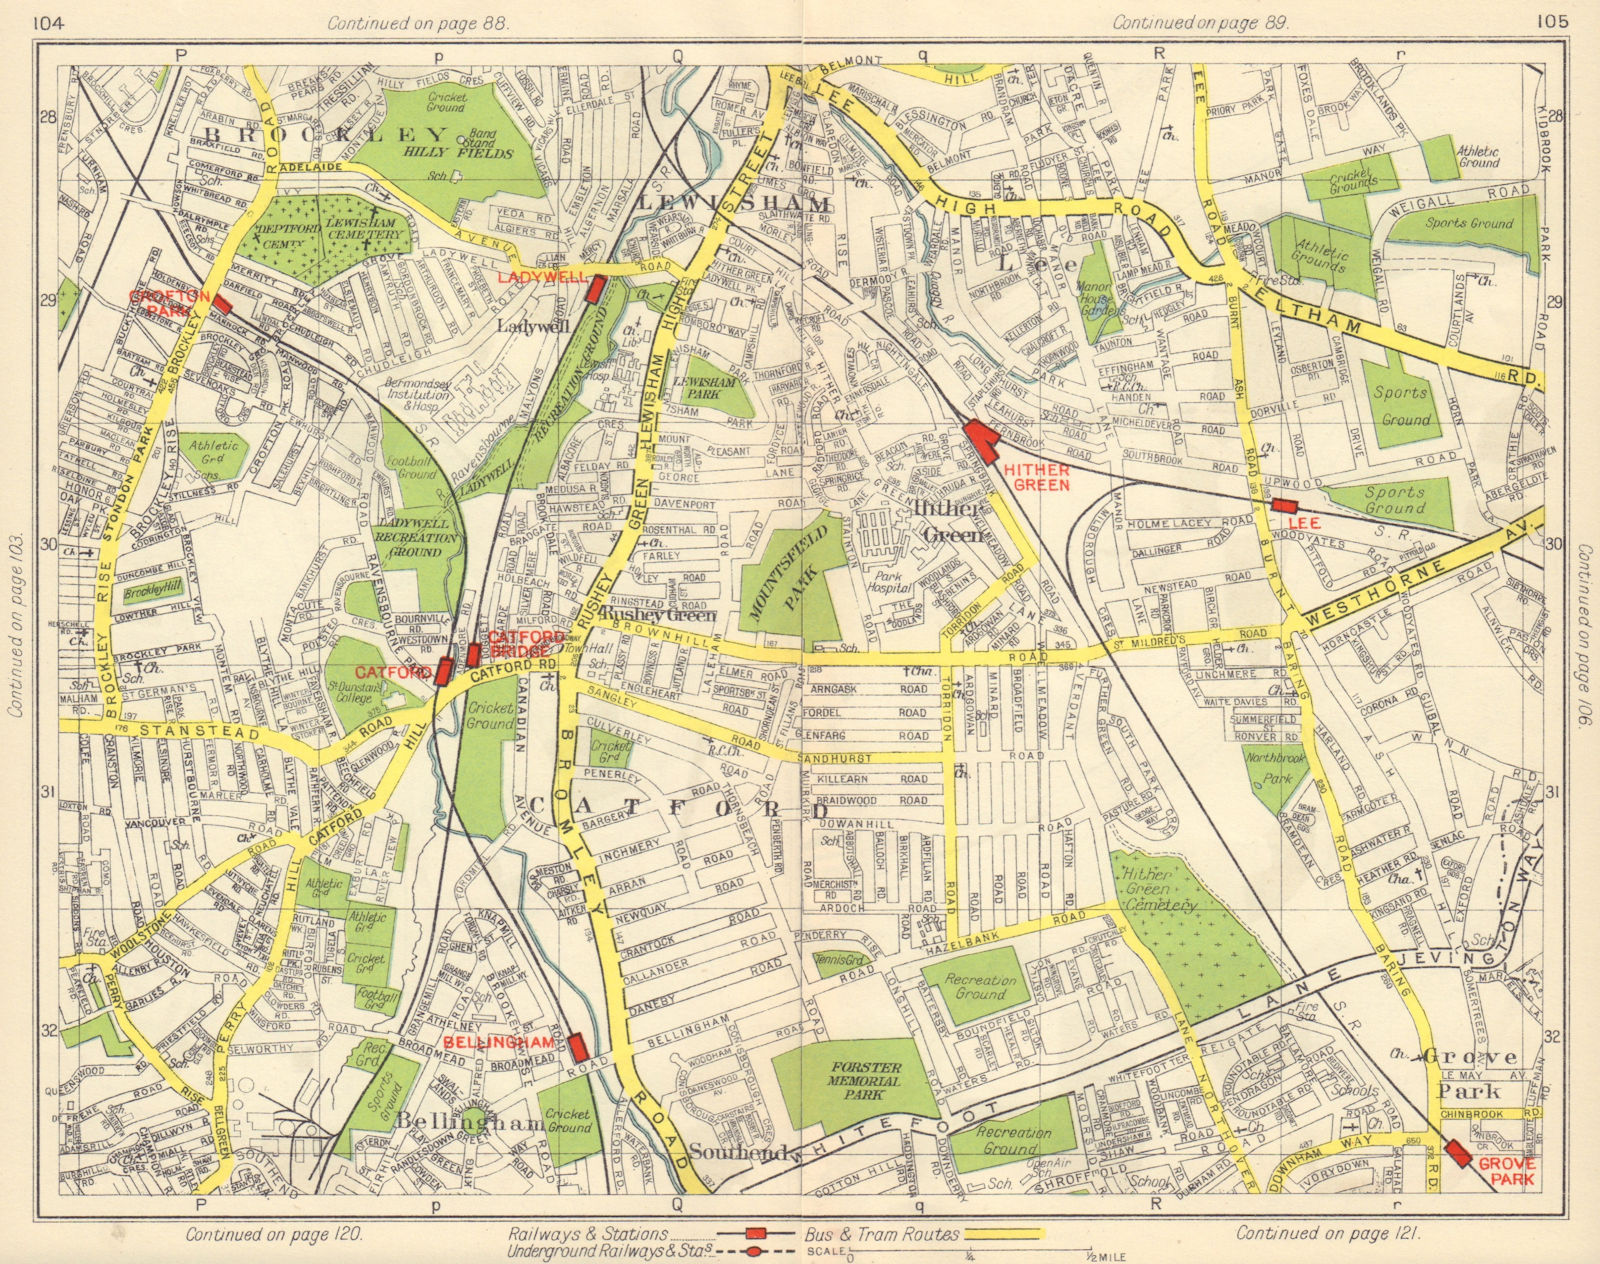 SE LONDON. Catford Bellingham Hither Green Lewisham Lee Ladywell 1948 old map